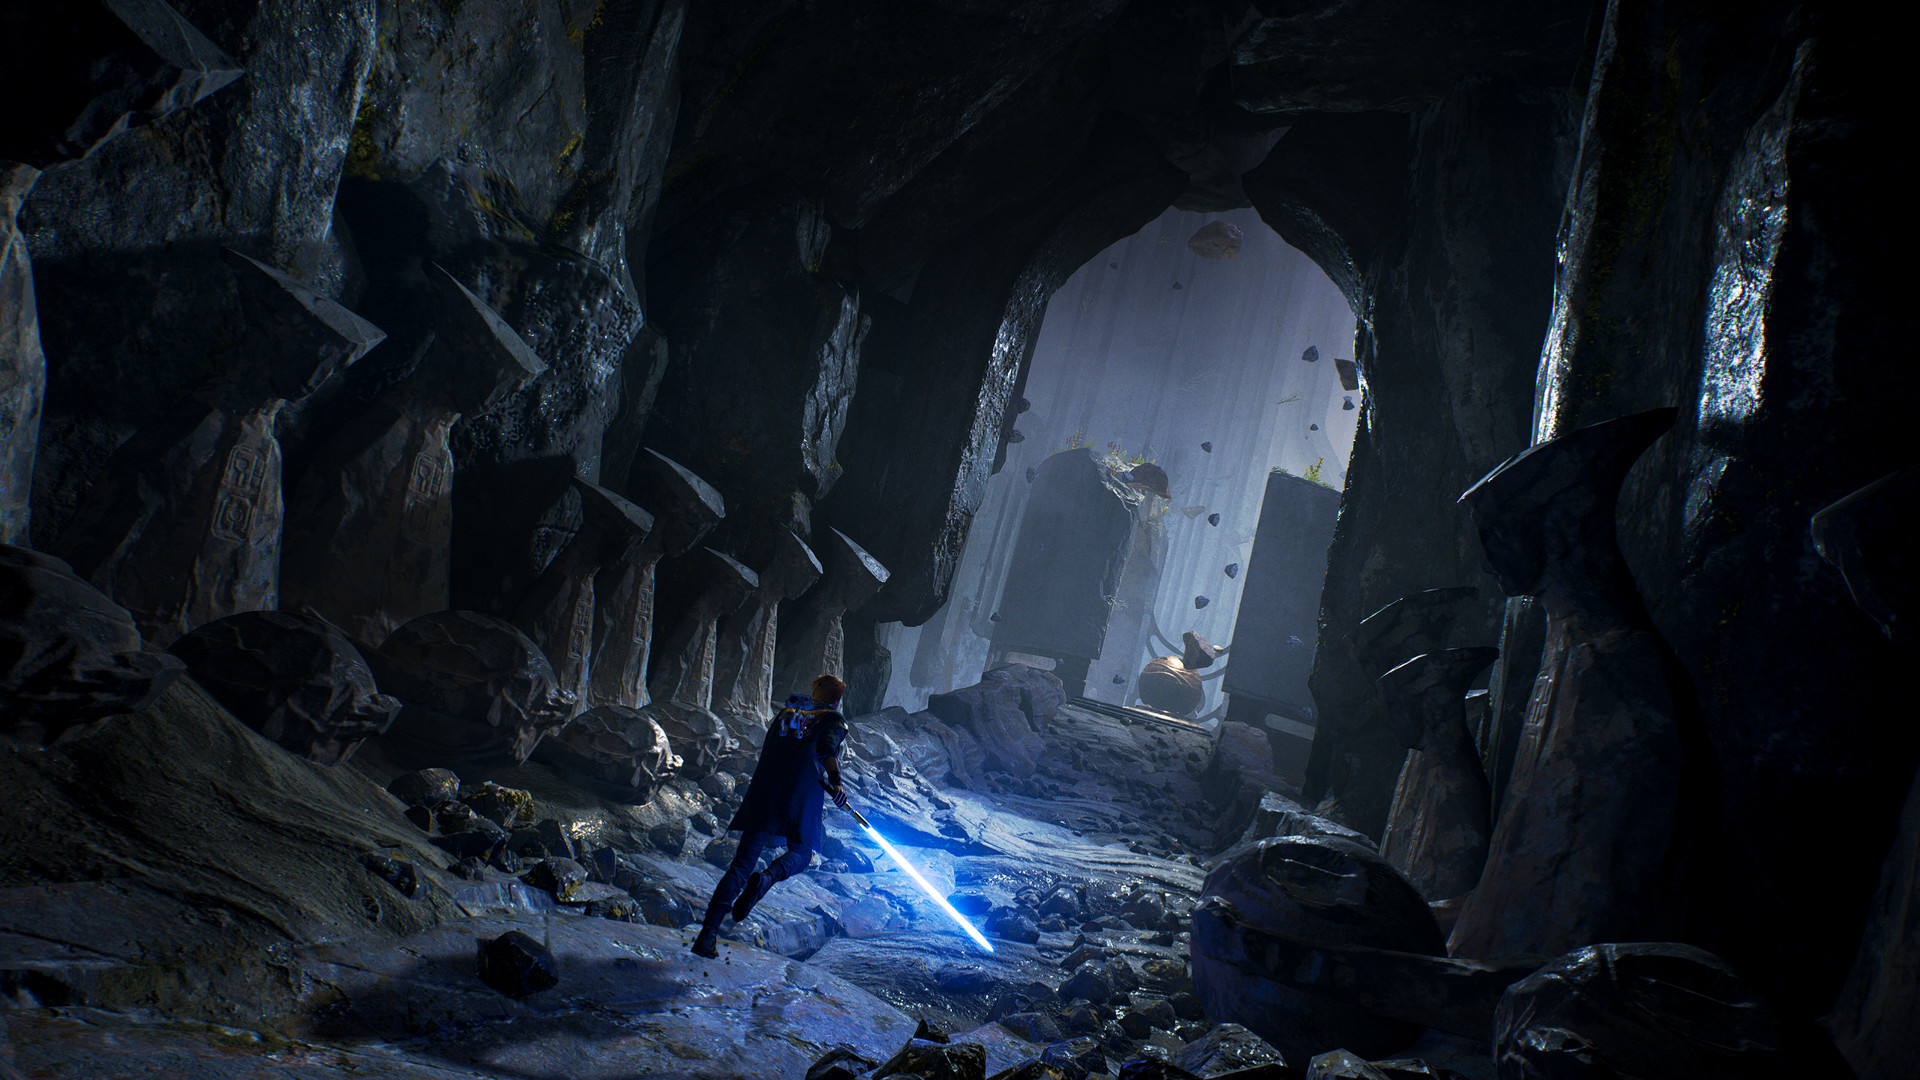 Star Wars Jedi: Fallen Order™ - A New Star Wars™ Action Adventure Game - EA  Official Site